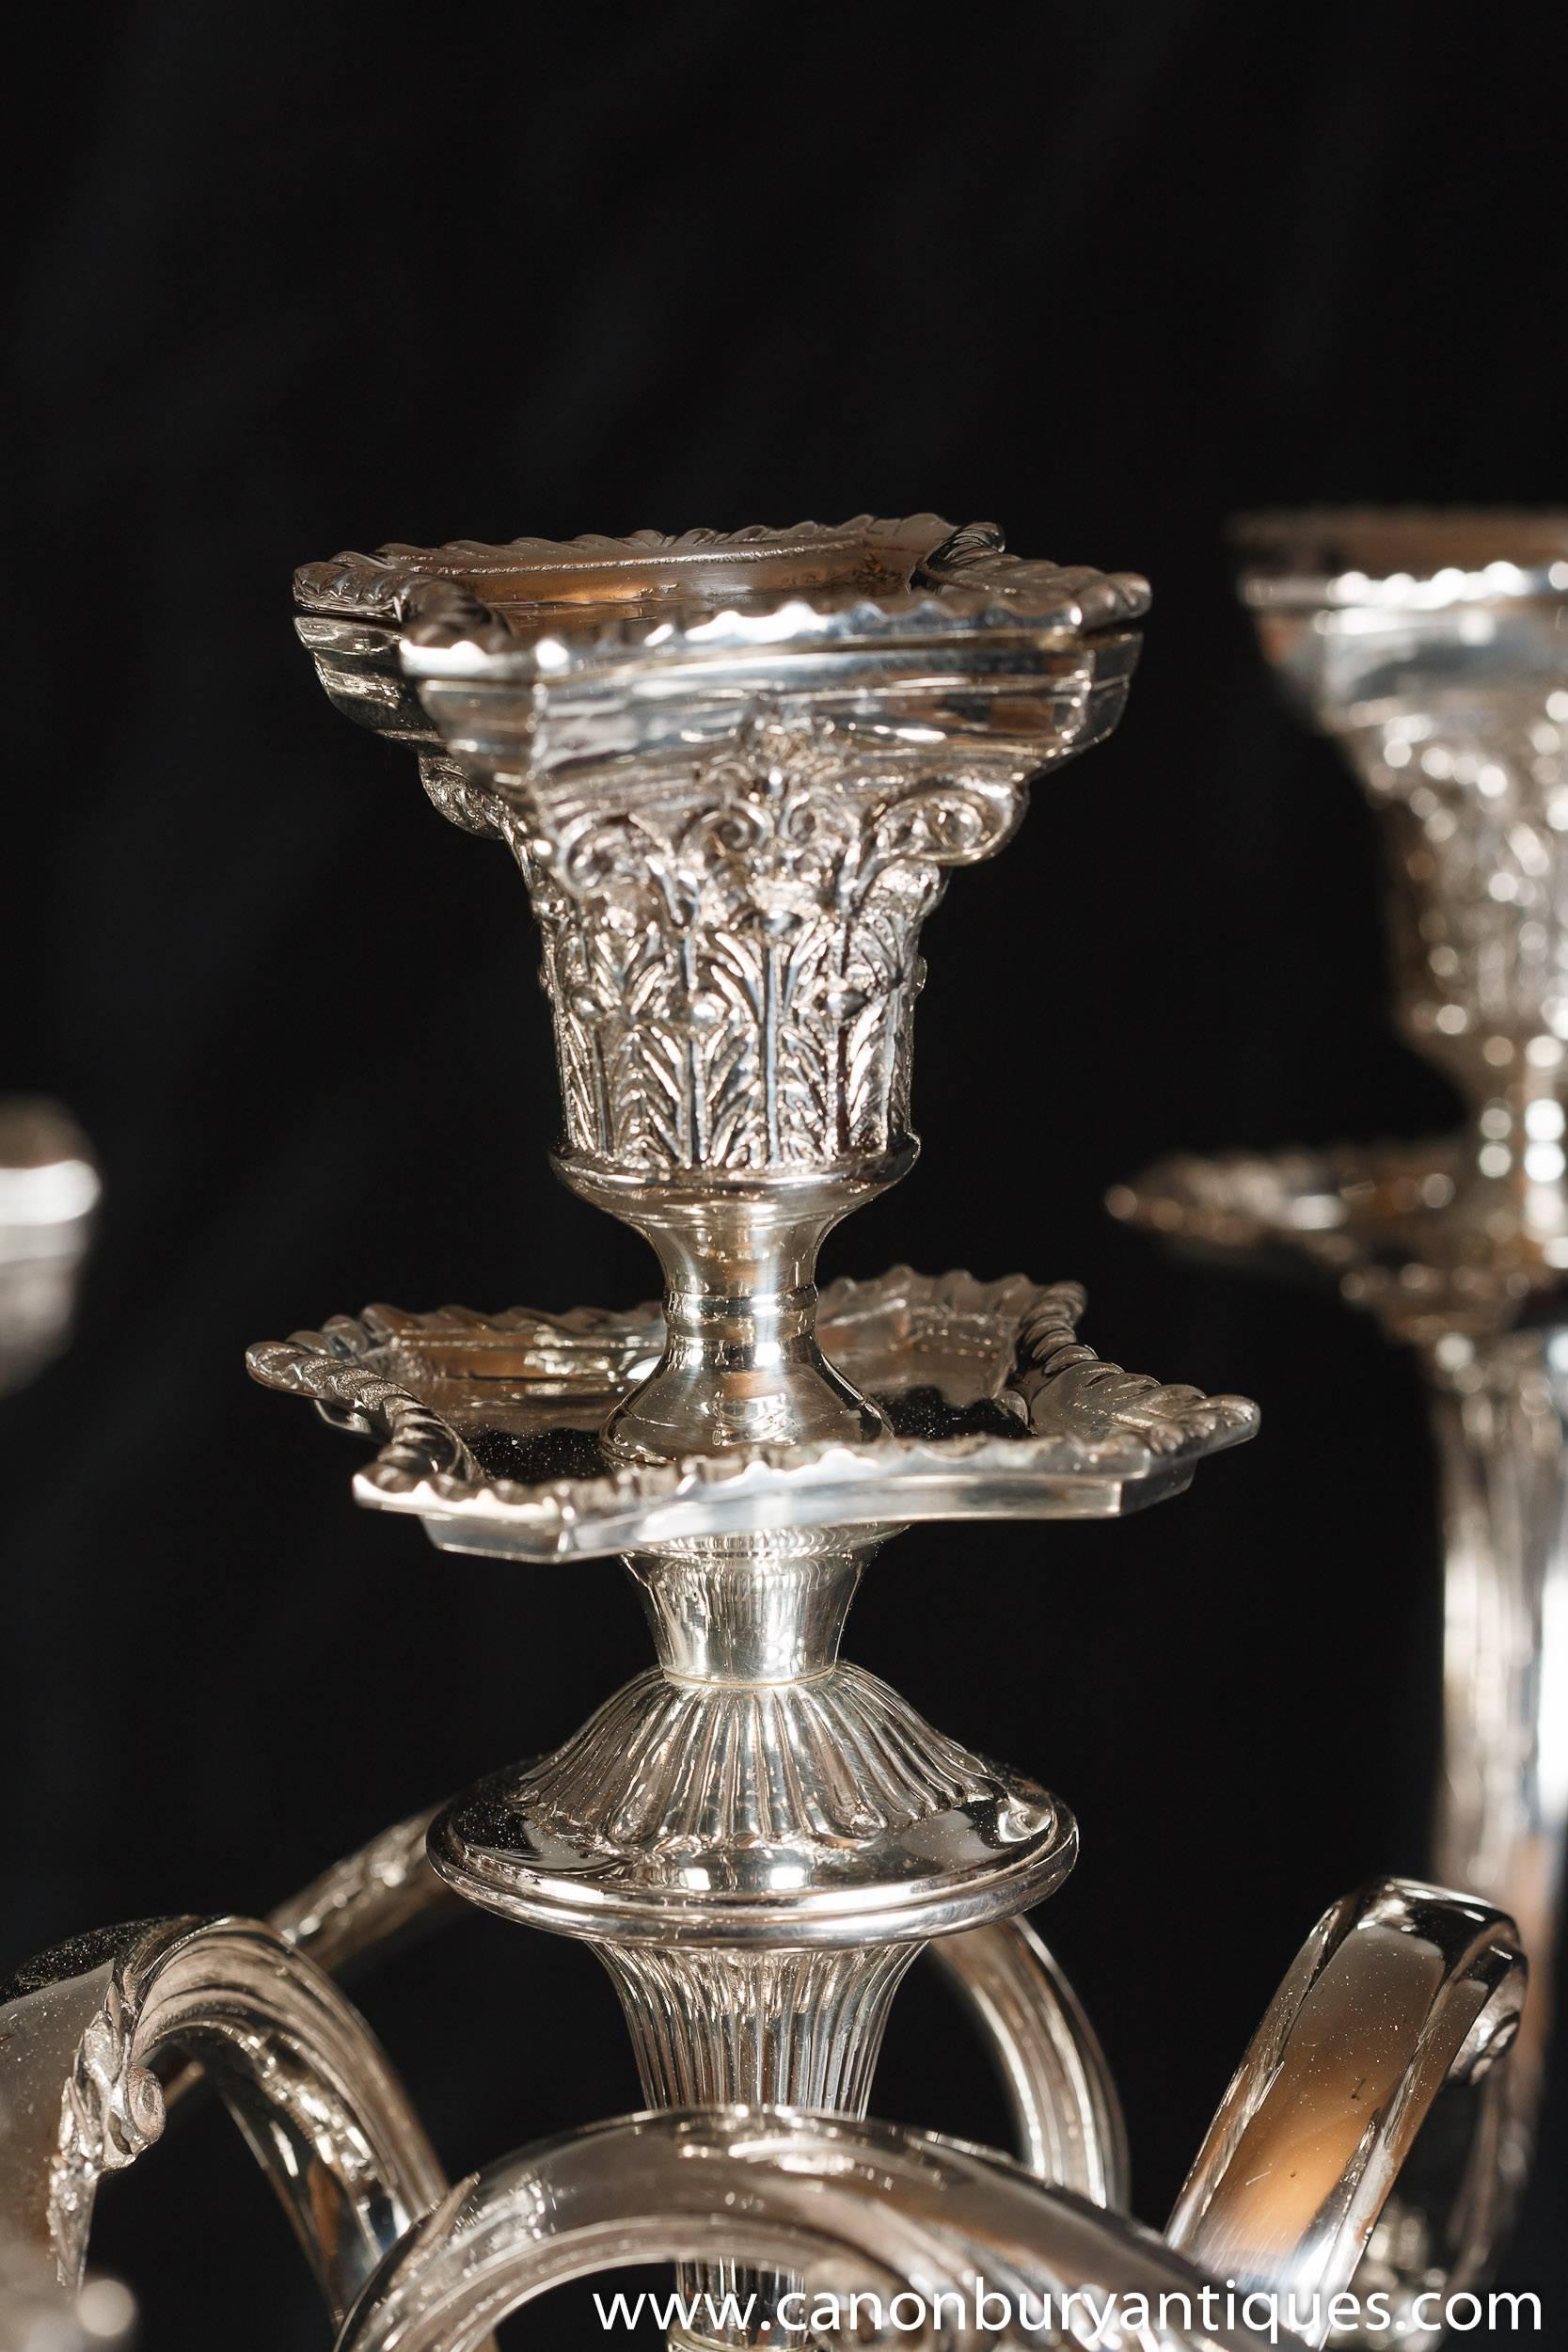 Come view these for yourself in our Hertfordshire warehouse. 20 minutes north of London.
Stunning pair of Regency style silver plate candelabras.
In the form of Classic doric columns as the main stem leading to the ornate candelabras